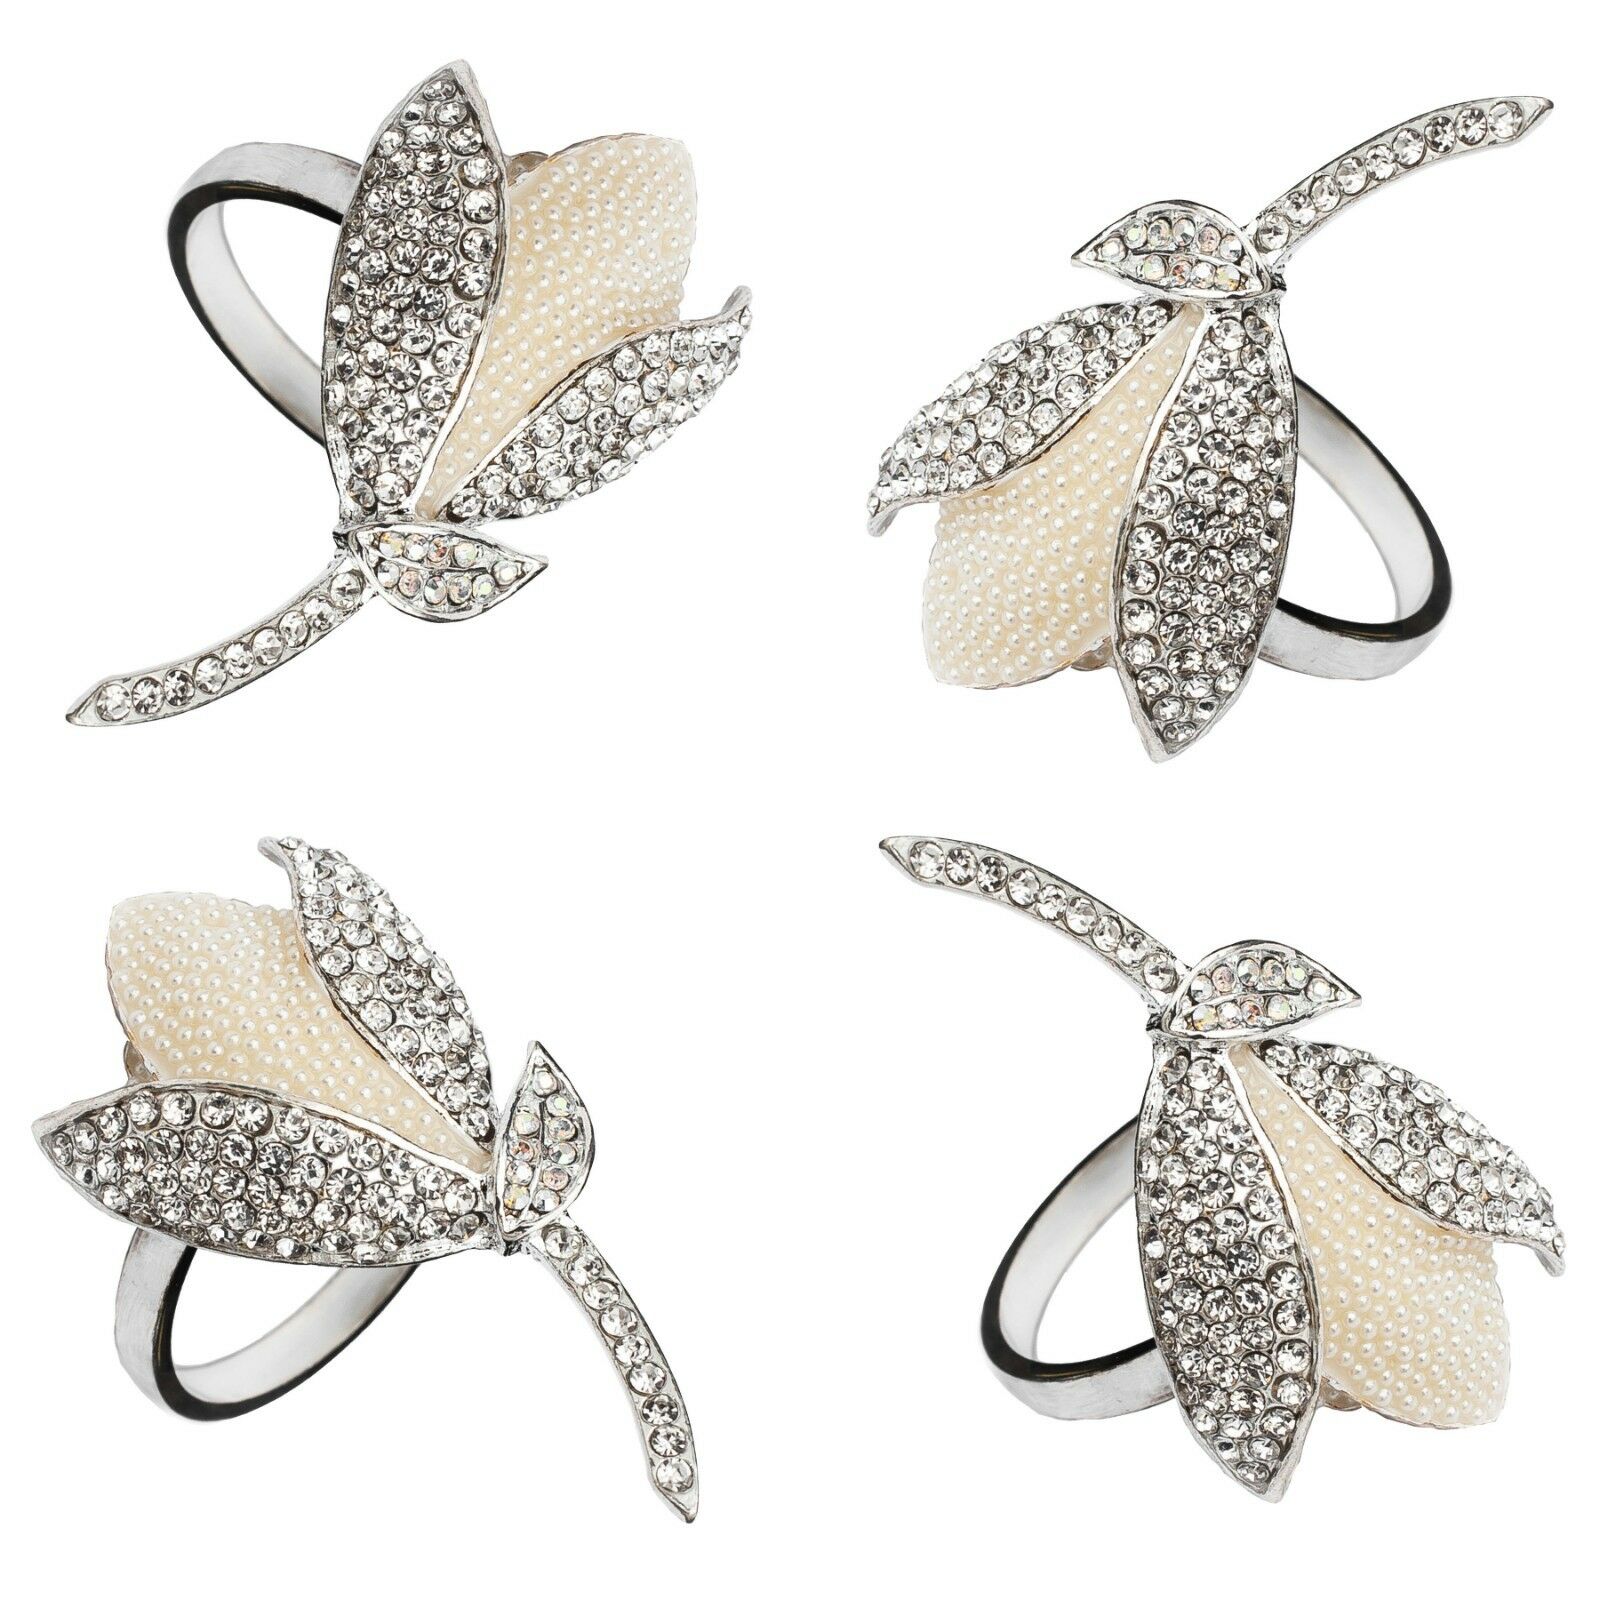 Fancy Tulipe Flower With Crystals Napkin Rings Set Of 4